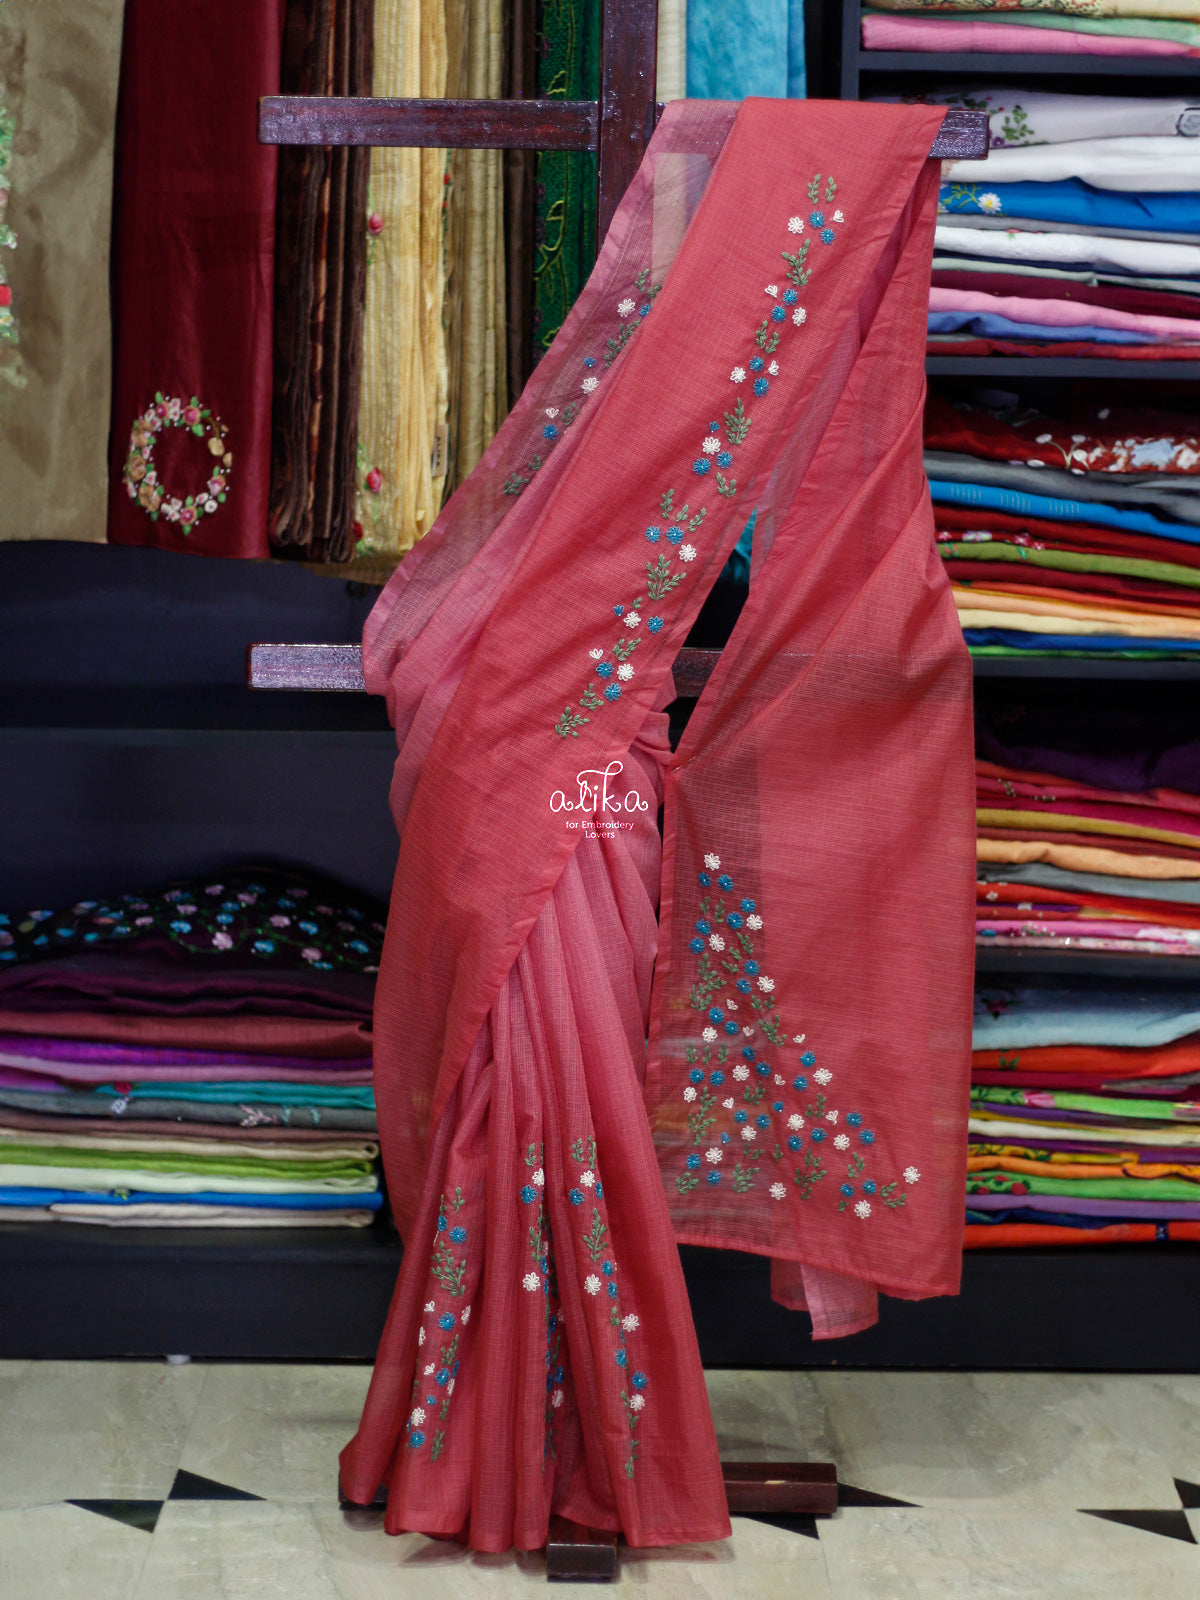 Exquisite Dark Pink Double-Shaded Silky Kota Saree with Laisy Daisy Floral Embroidery - Elegance Redefined